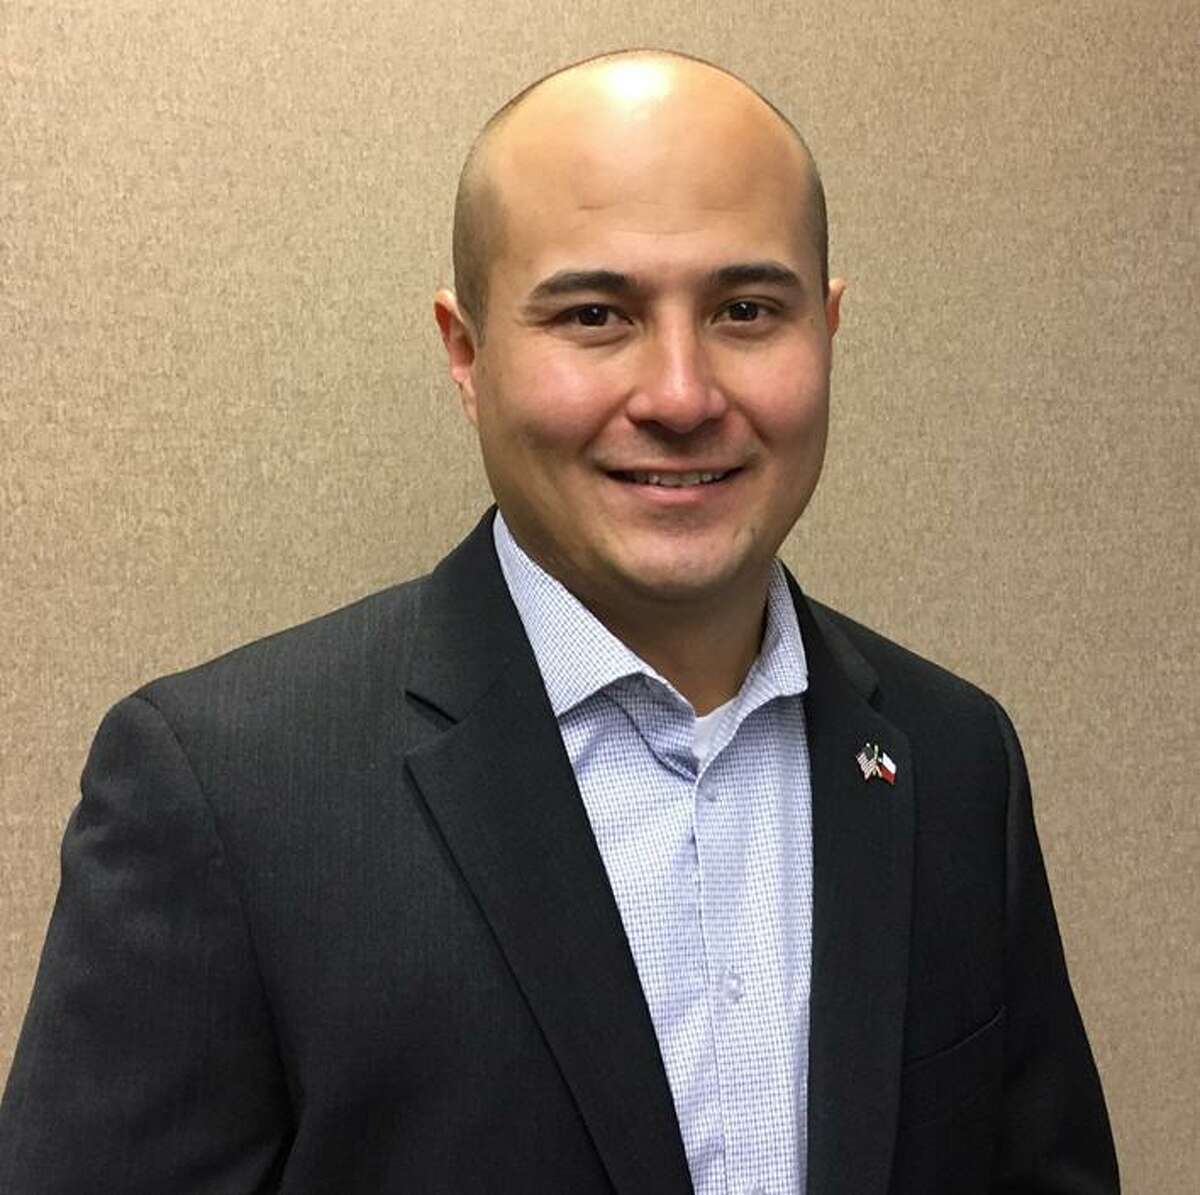 Jacey Jetton is chairman of the Fort Bend County Republican Party.